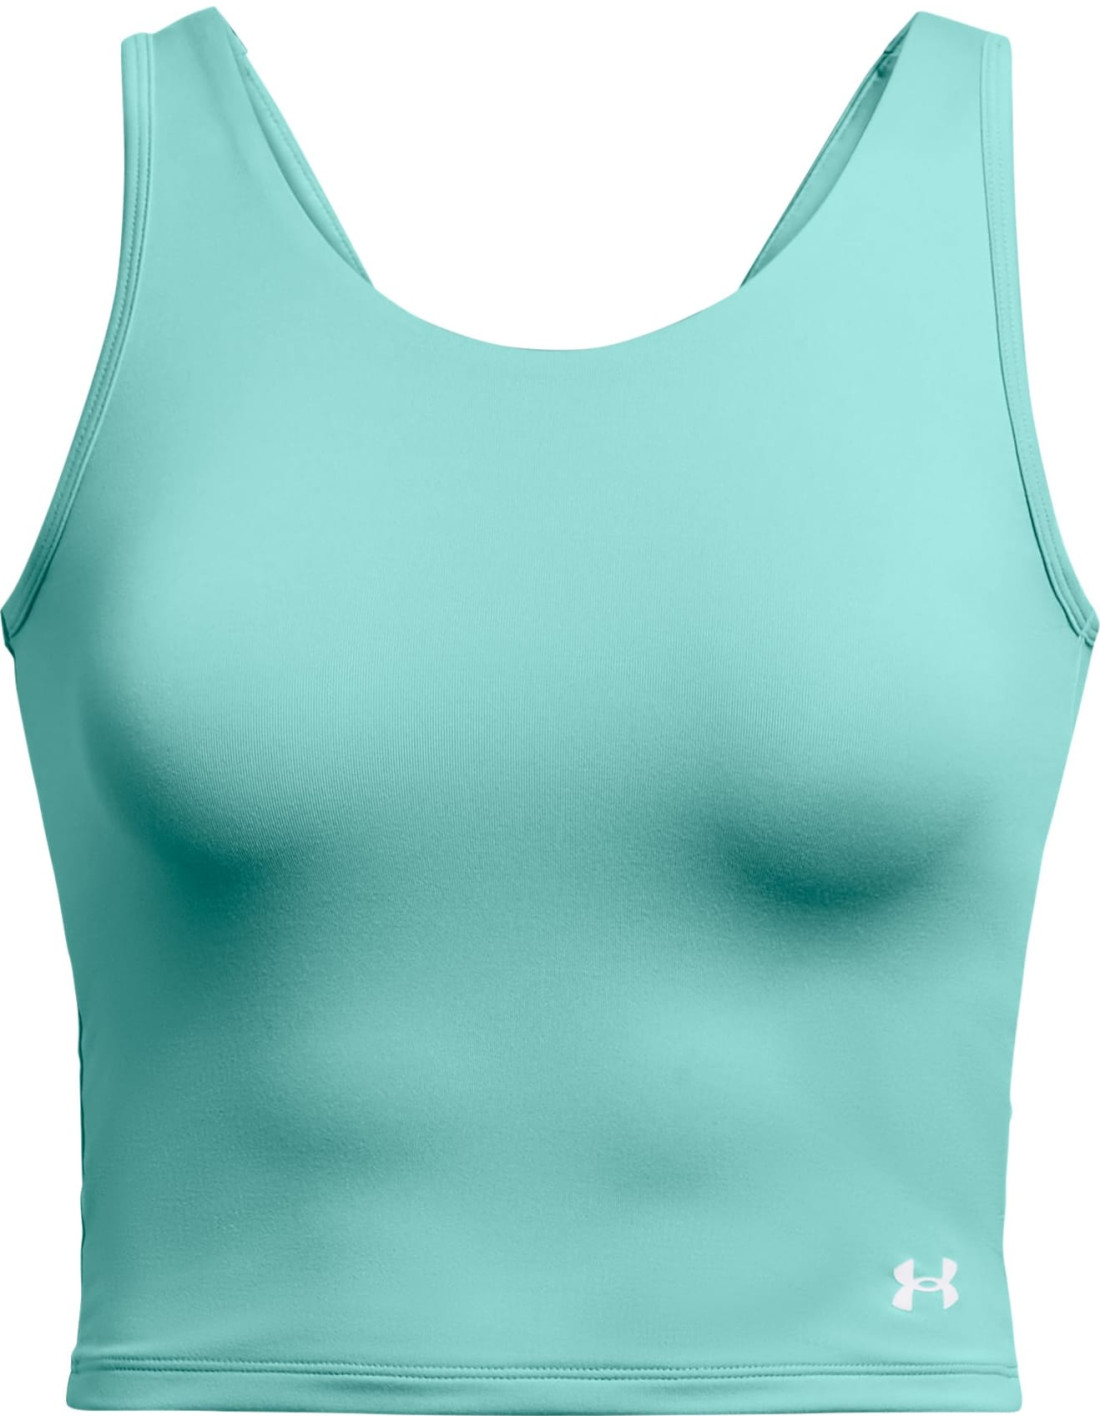 Purchase the Under Armour Sports Bra Mid Crossback white by ASMC